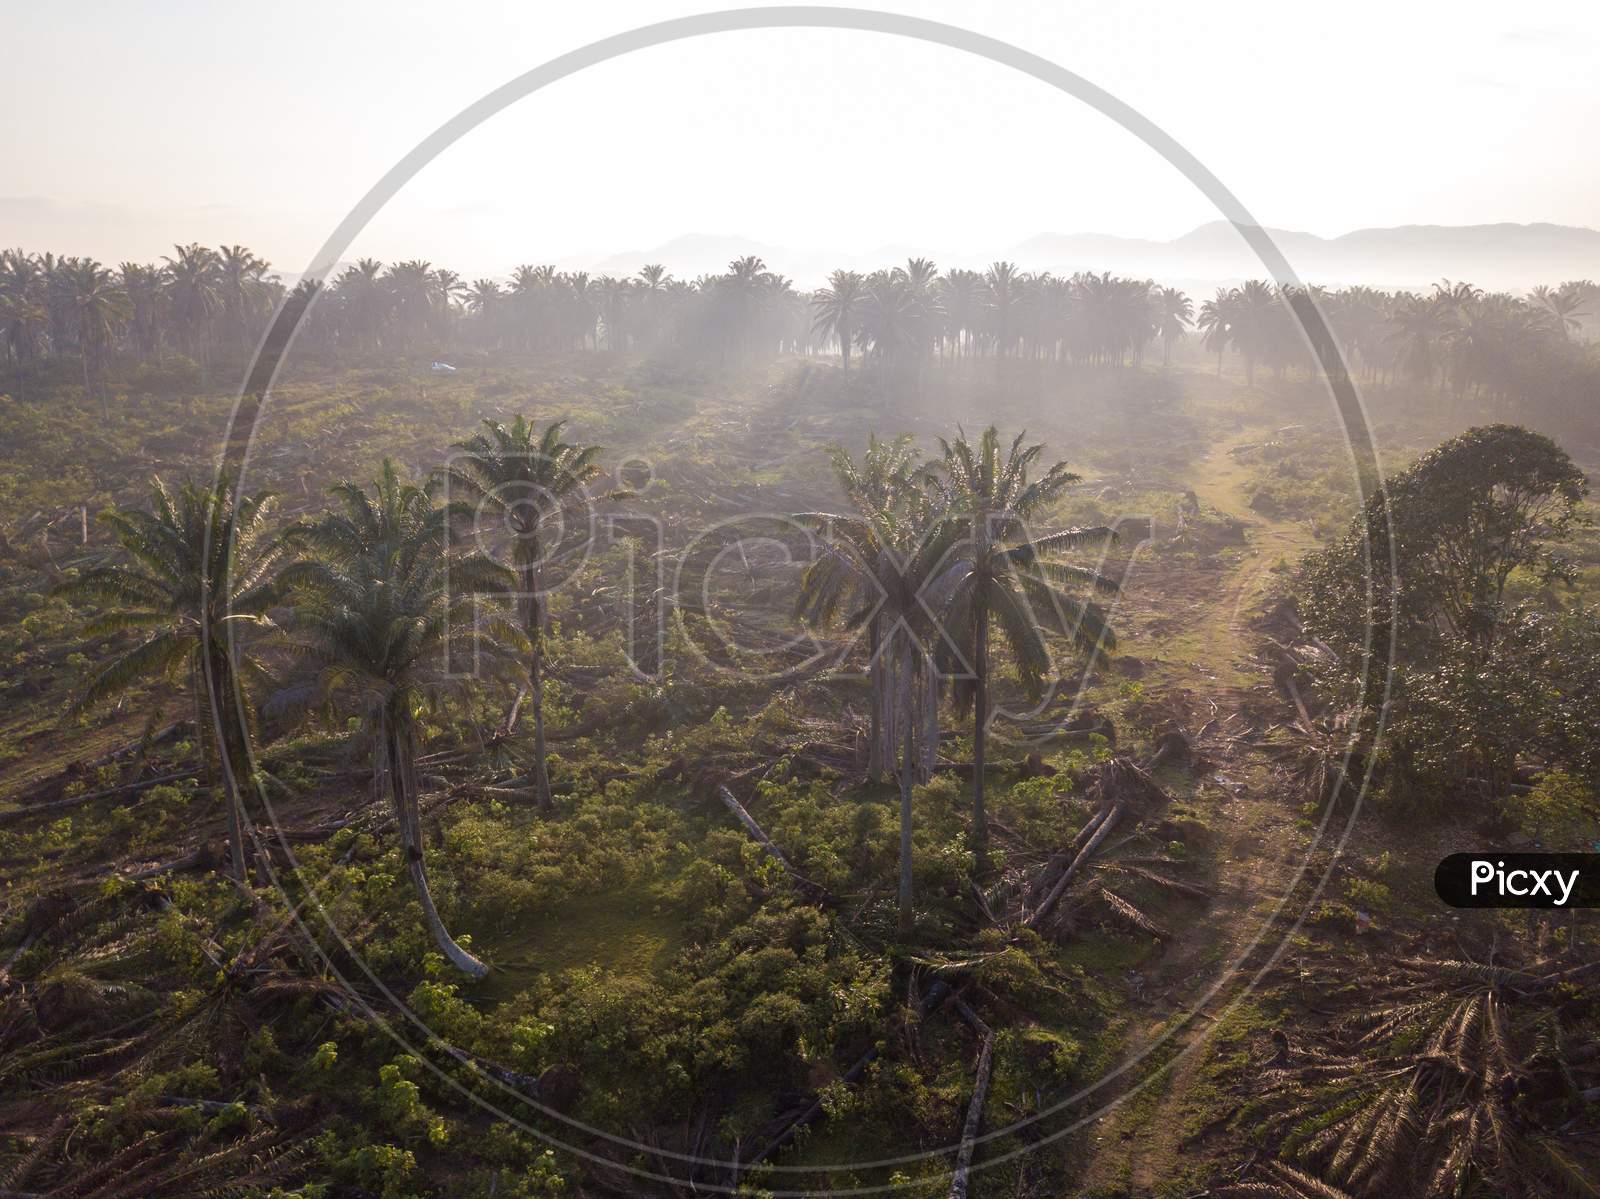 Aerial View Land Cleared At Oil Palm Estate In Early Morning For Other Plantation.